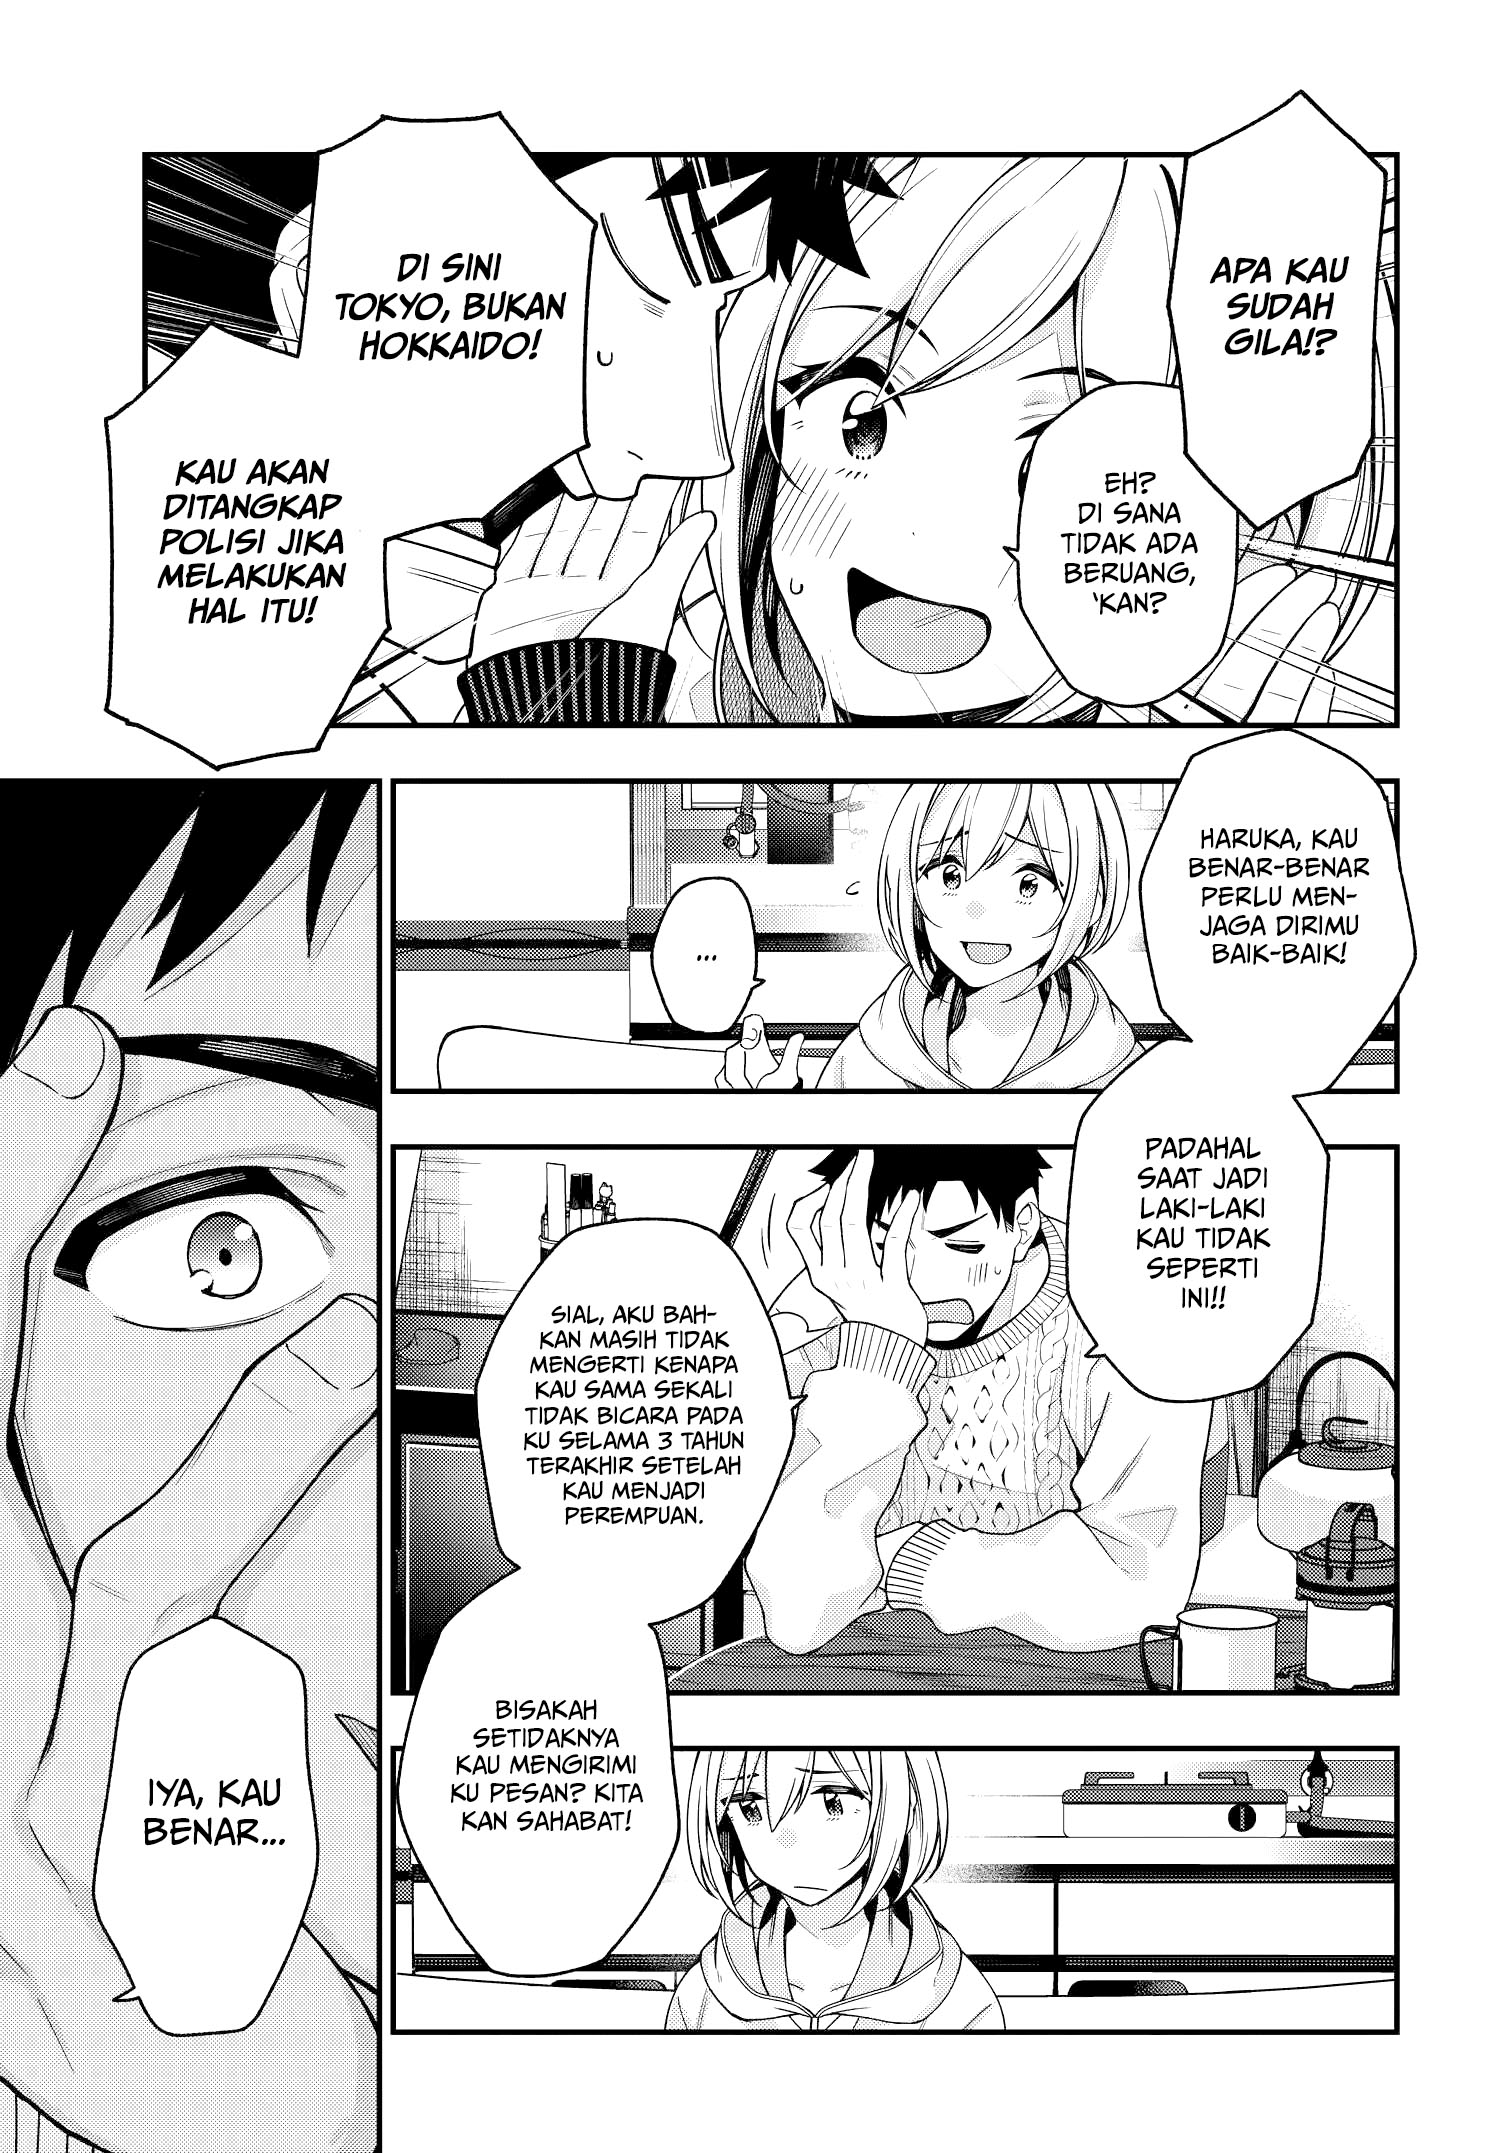 A Choice of Boyfriend and Girlfriend Chapter 02 28